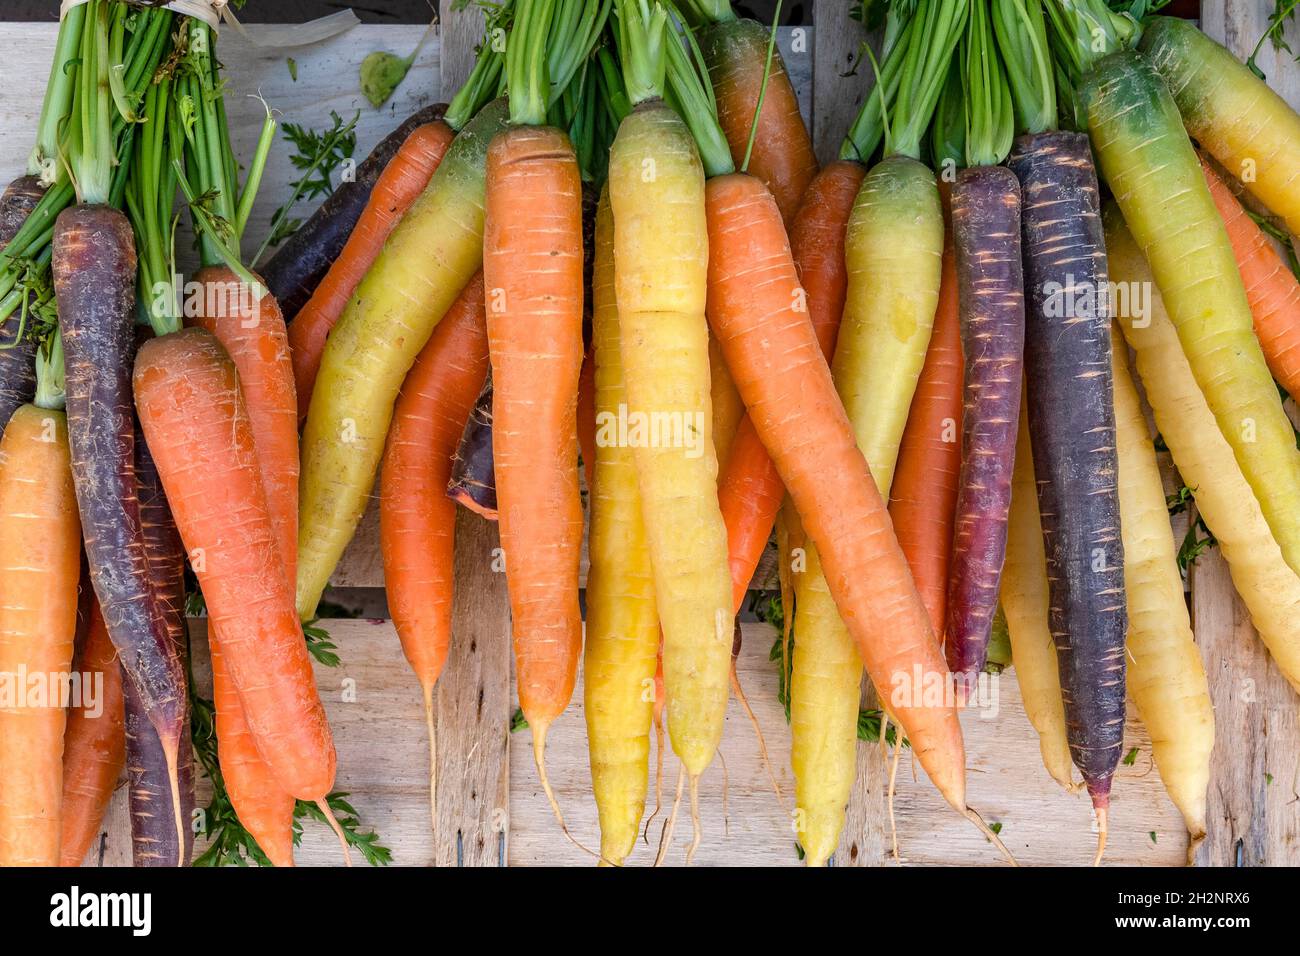 Colourful old carrot varieties seen at the  market of Libourne, southern France Stock Photo